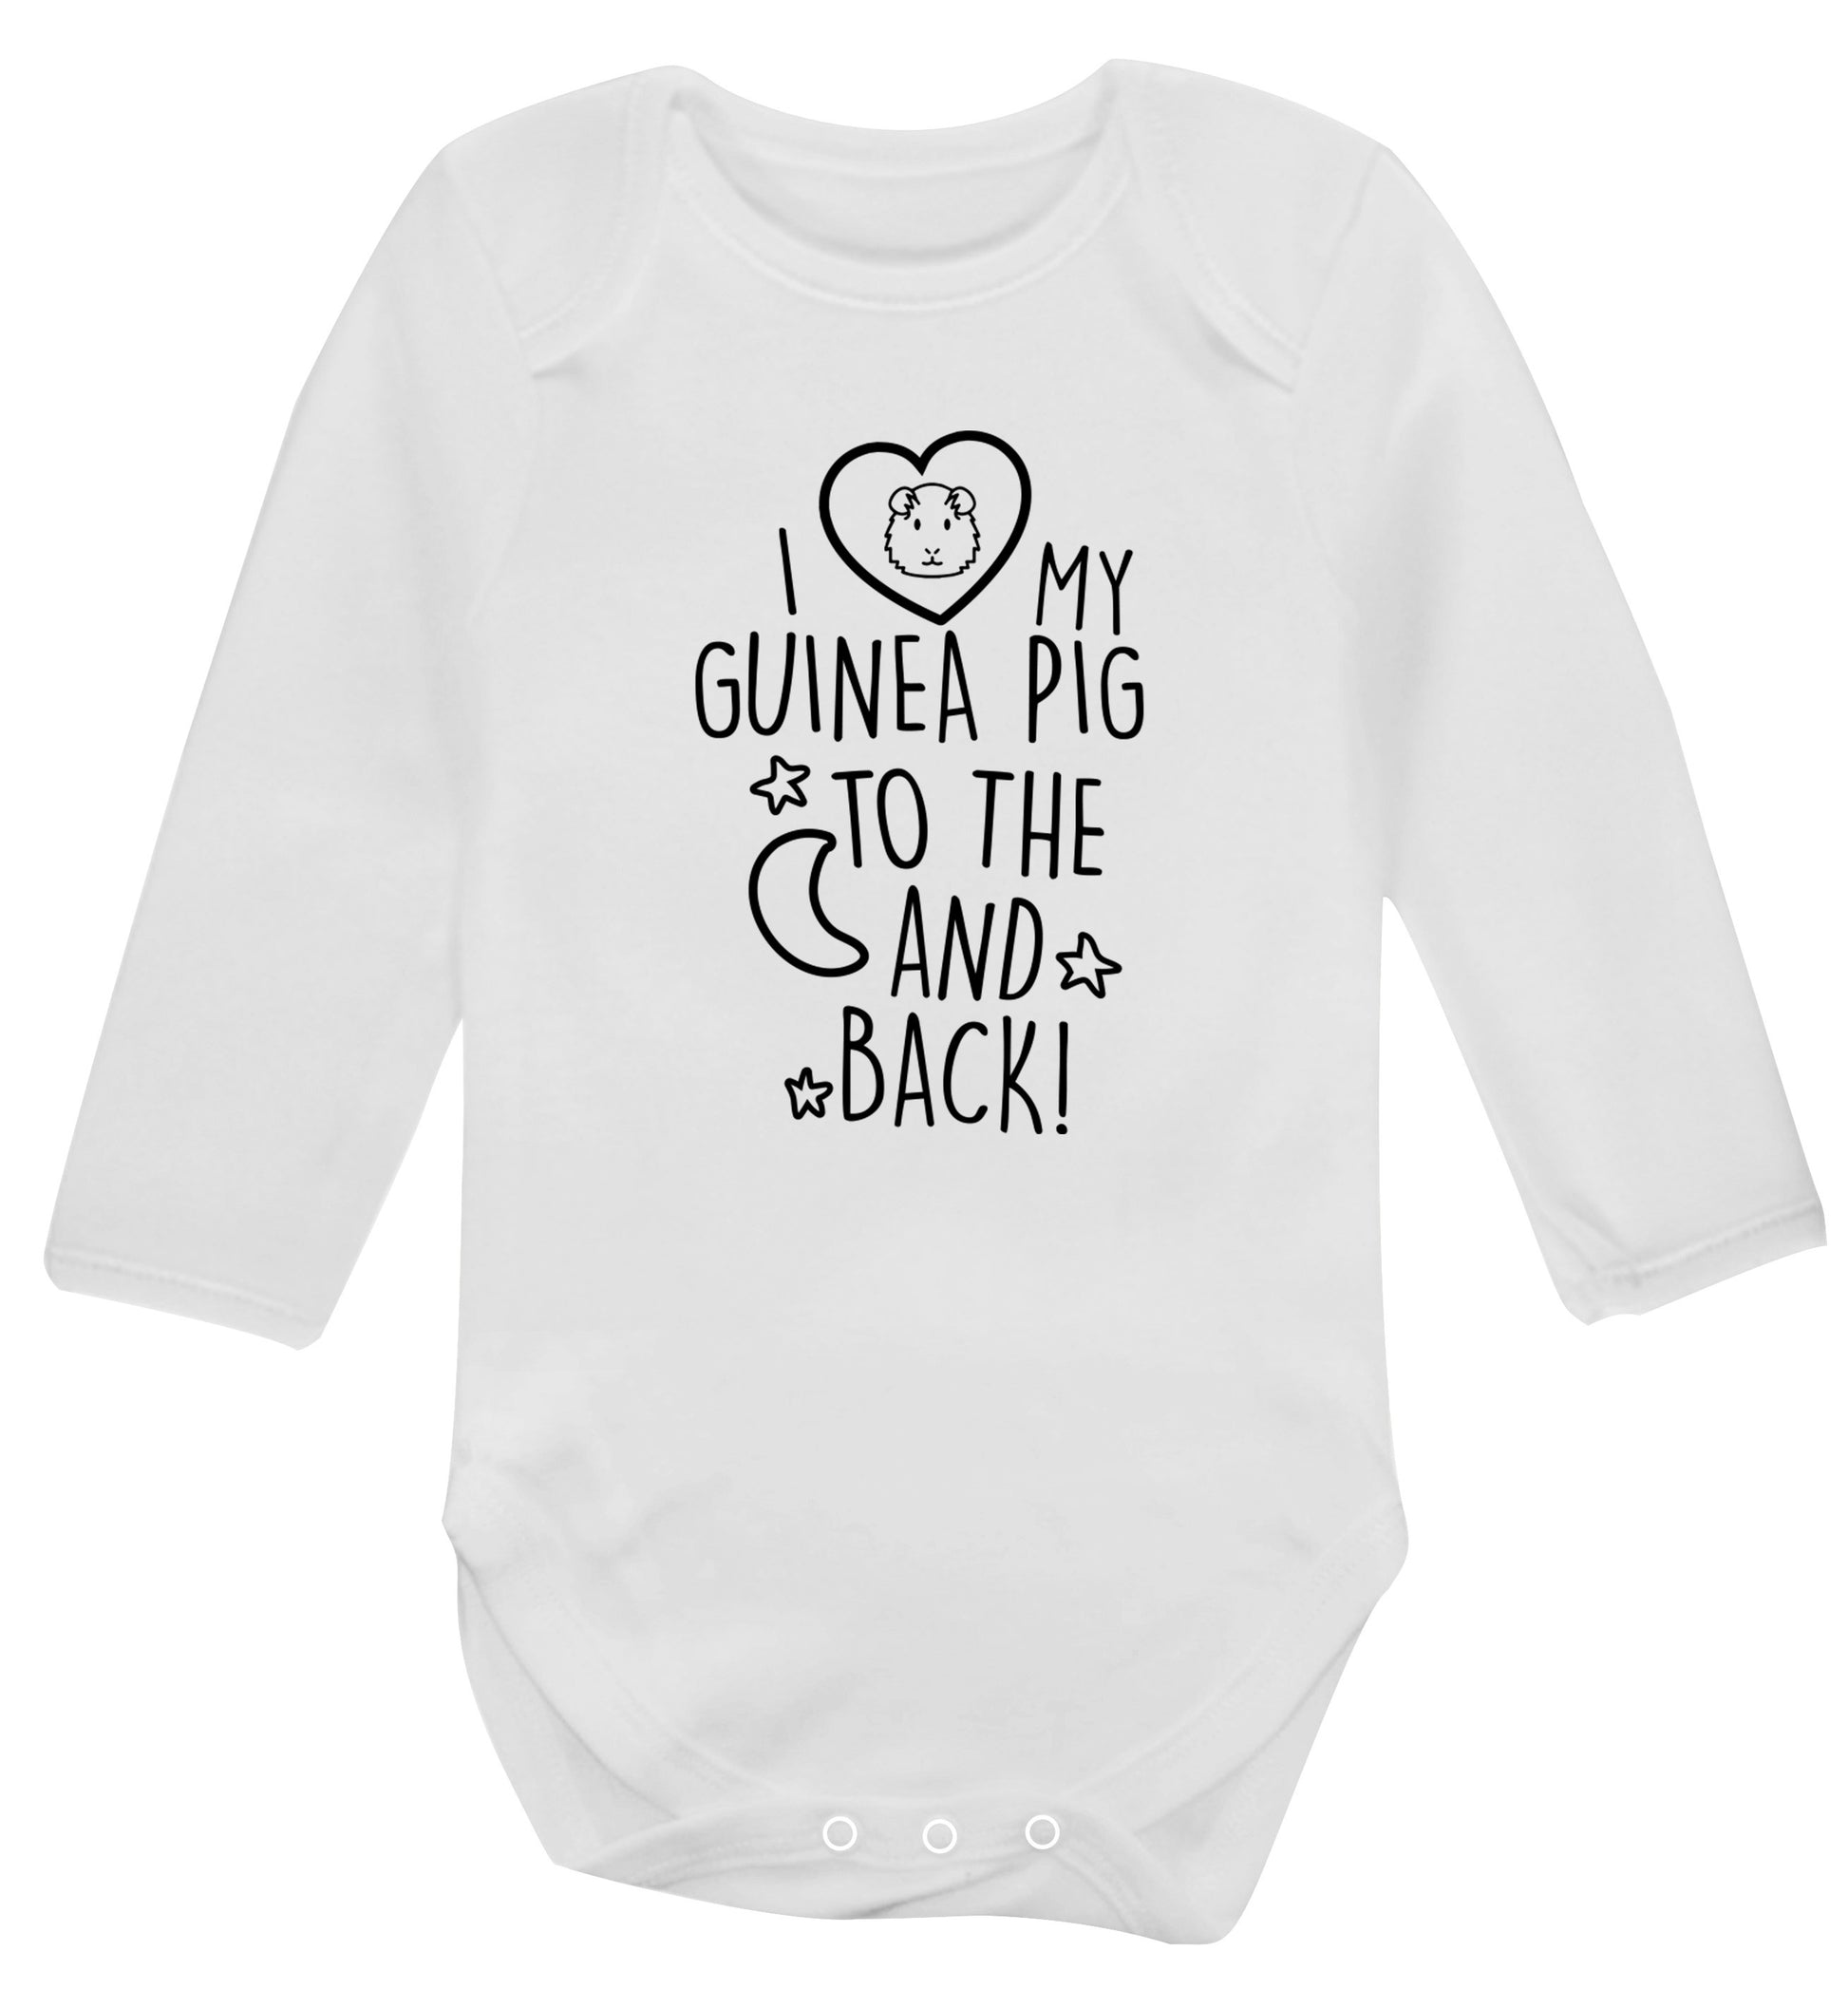 I love my guinea pig to the moon and back Baby Vest long sleeved white 6-12 months